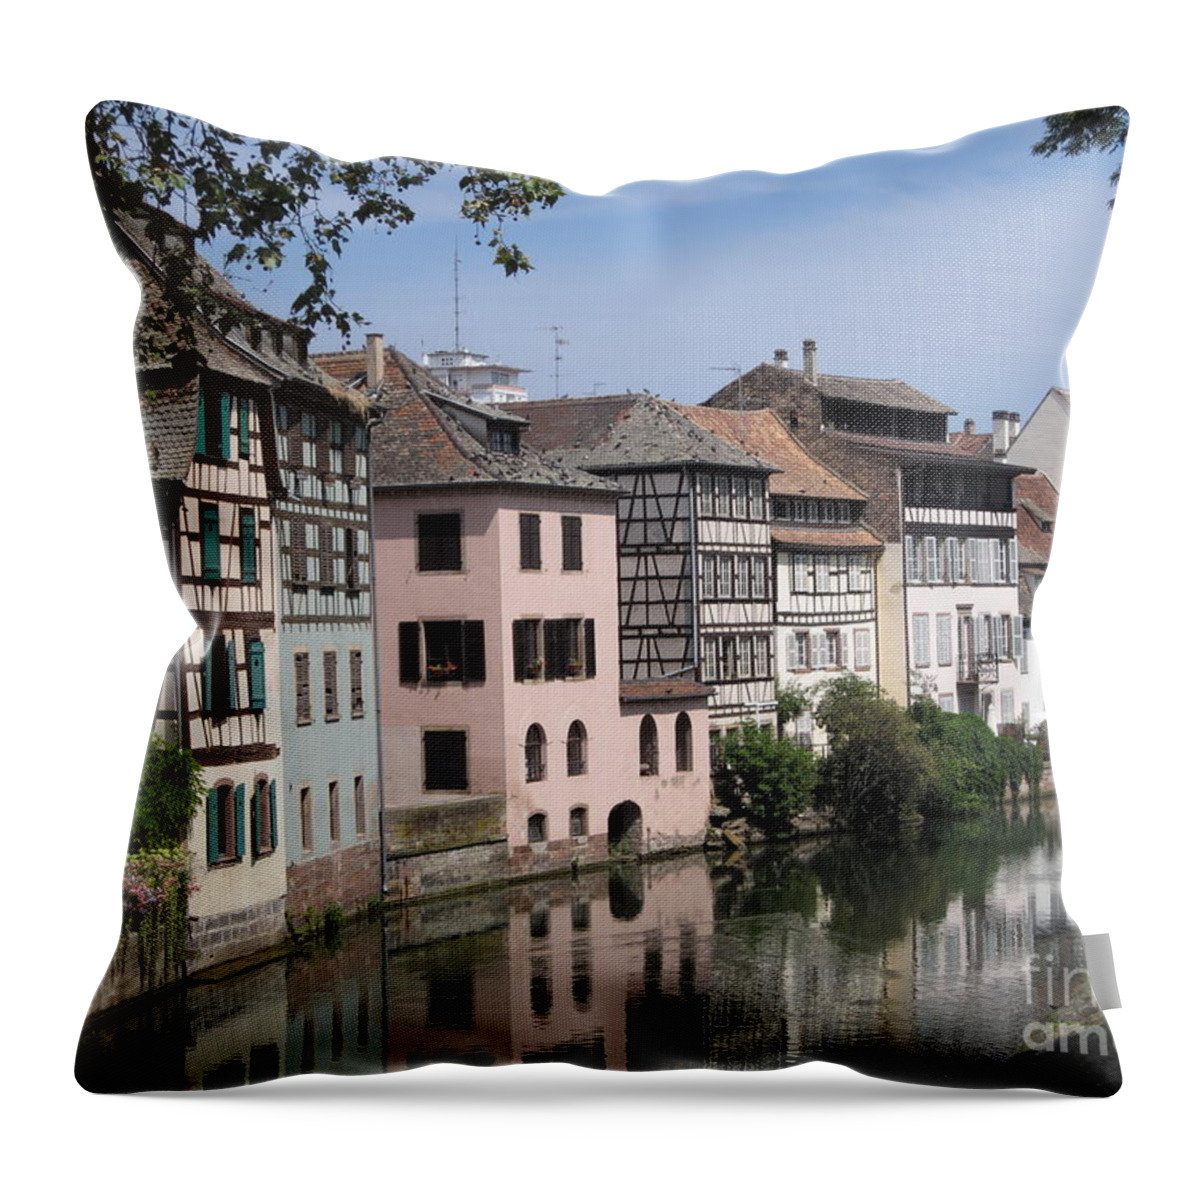 Old Throw Pillow featuring the photograph Strasbourg France 2 by Amanda Mohler